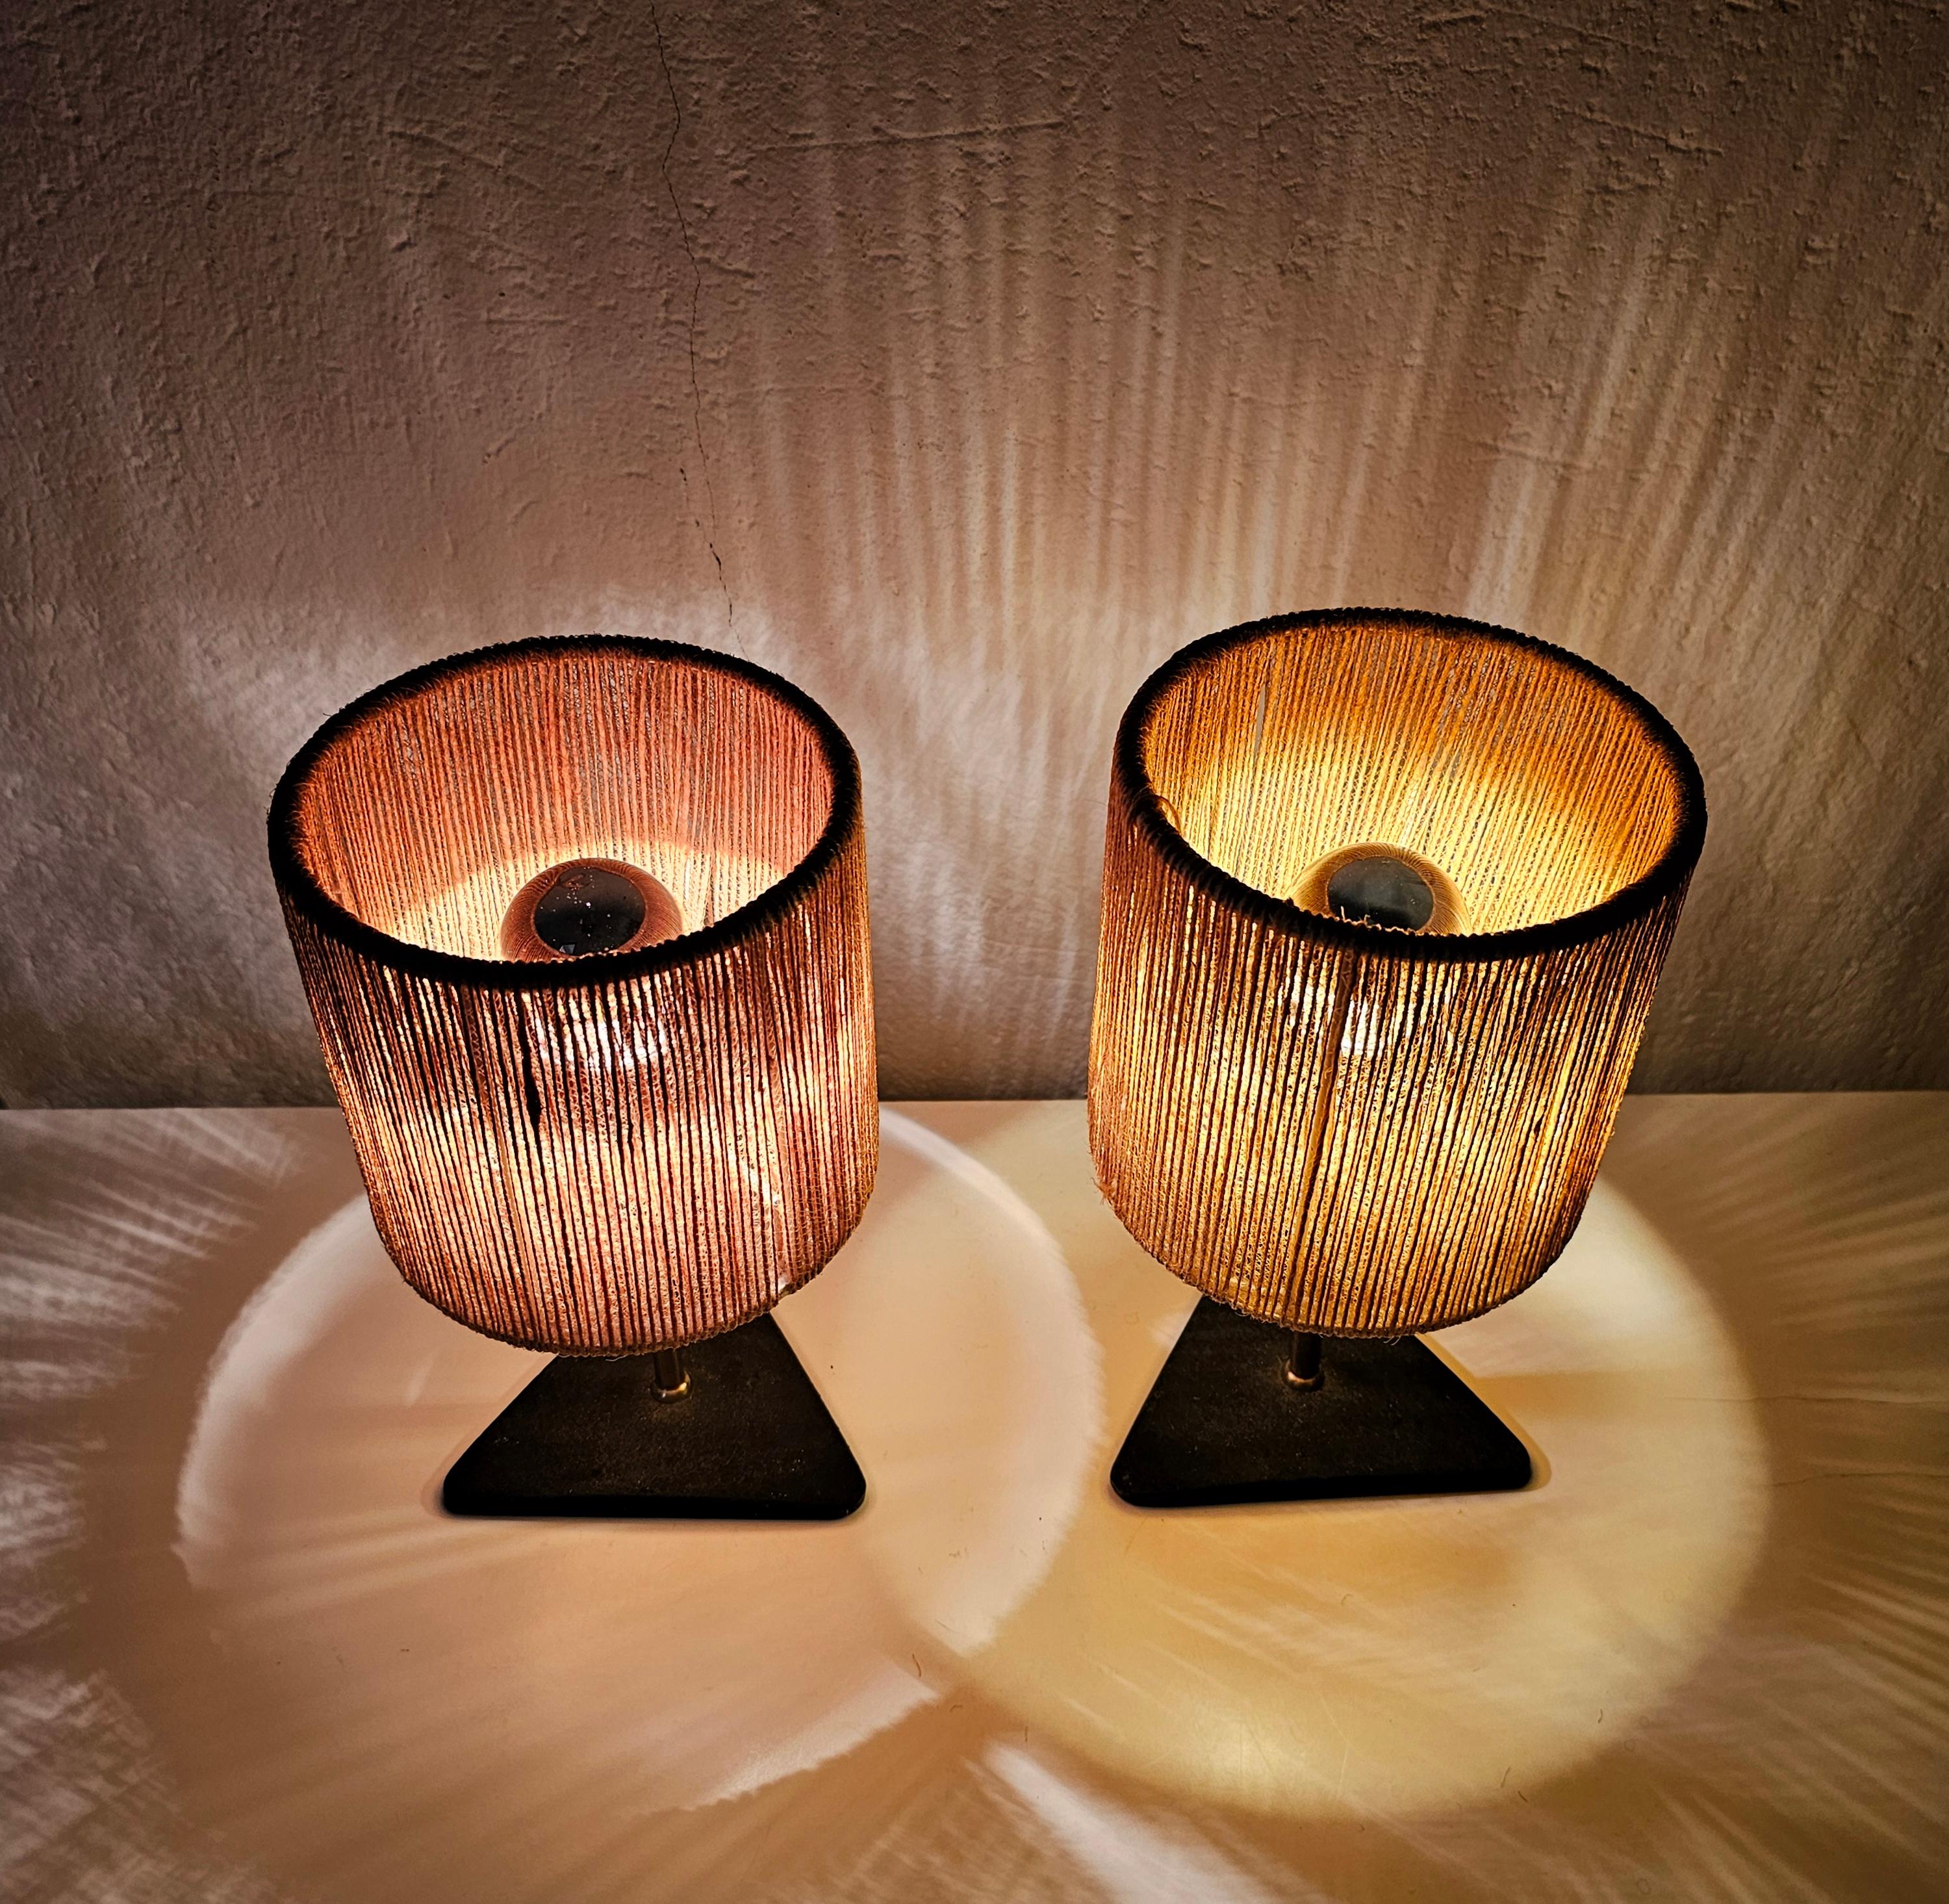 Austrian Pair of Mid Century Modern Table Lamps in style of Carl Aubock, Austria 1940s For Sale